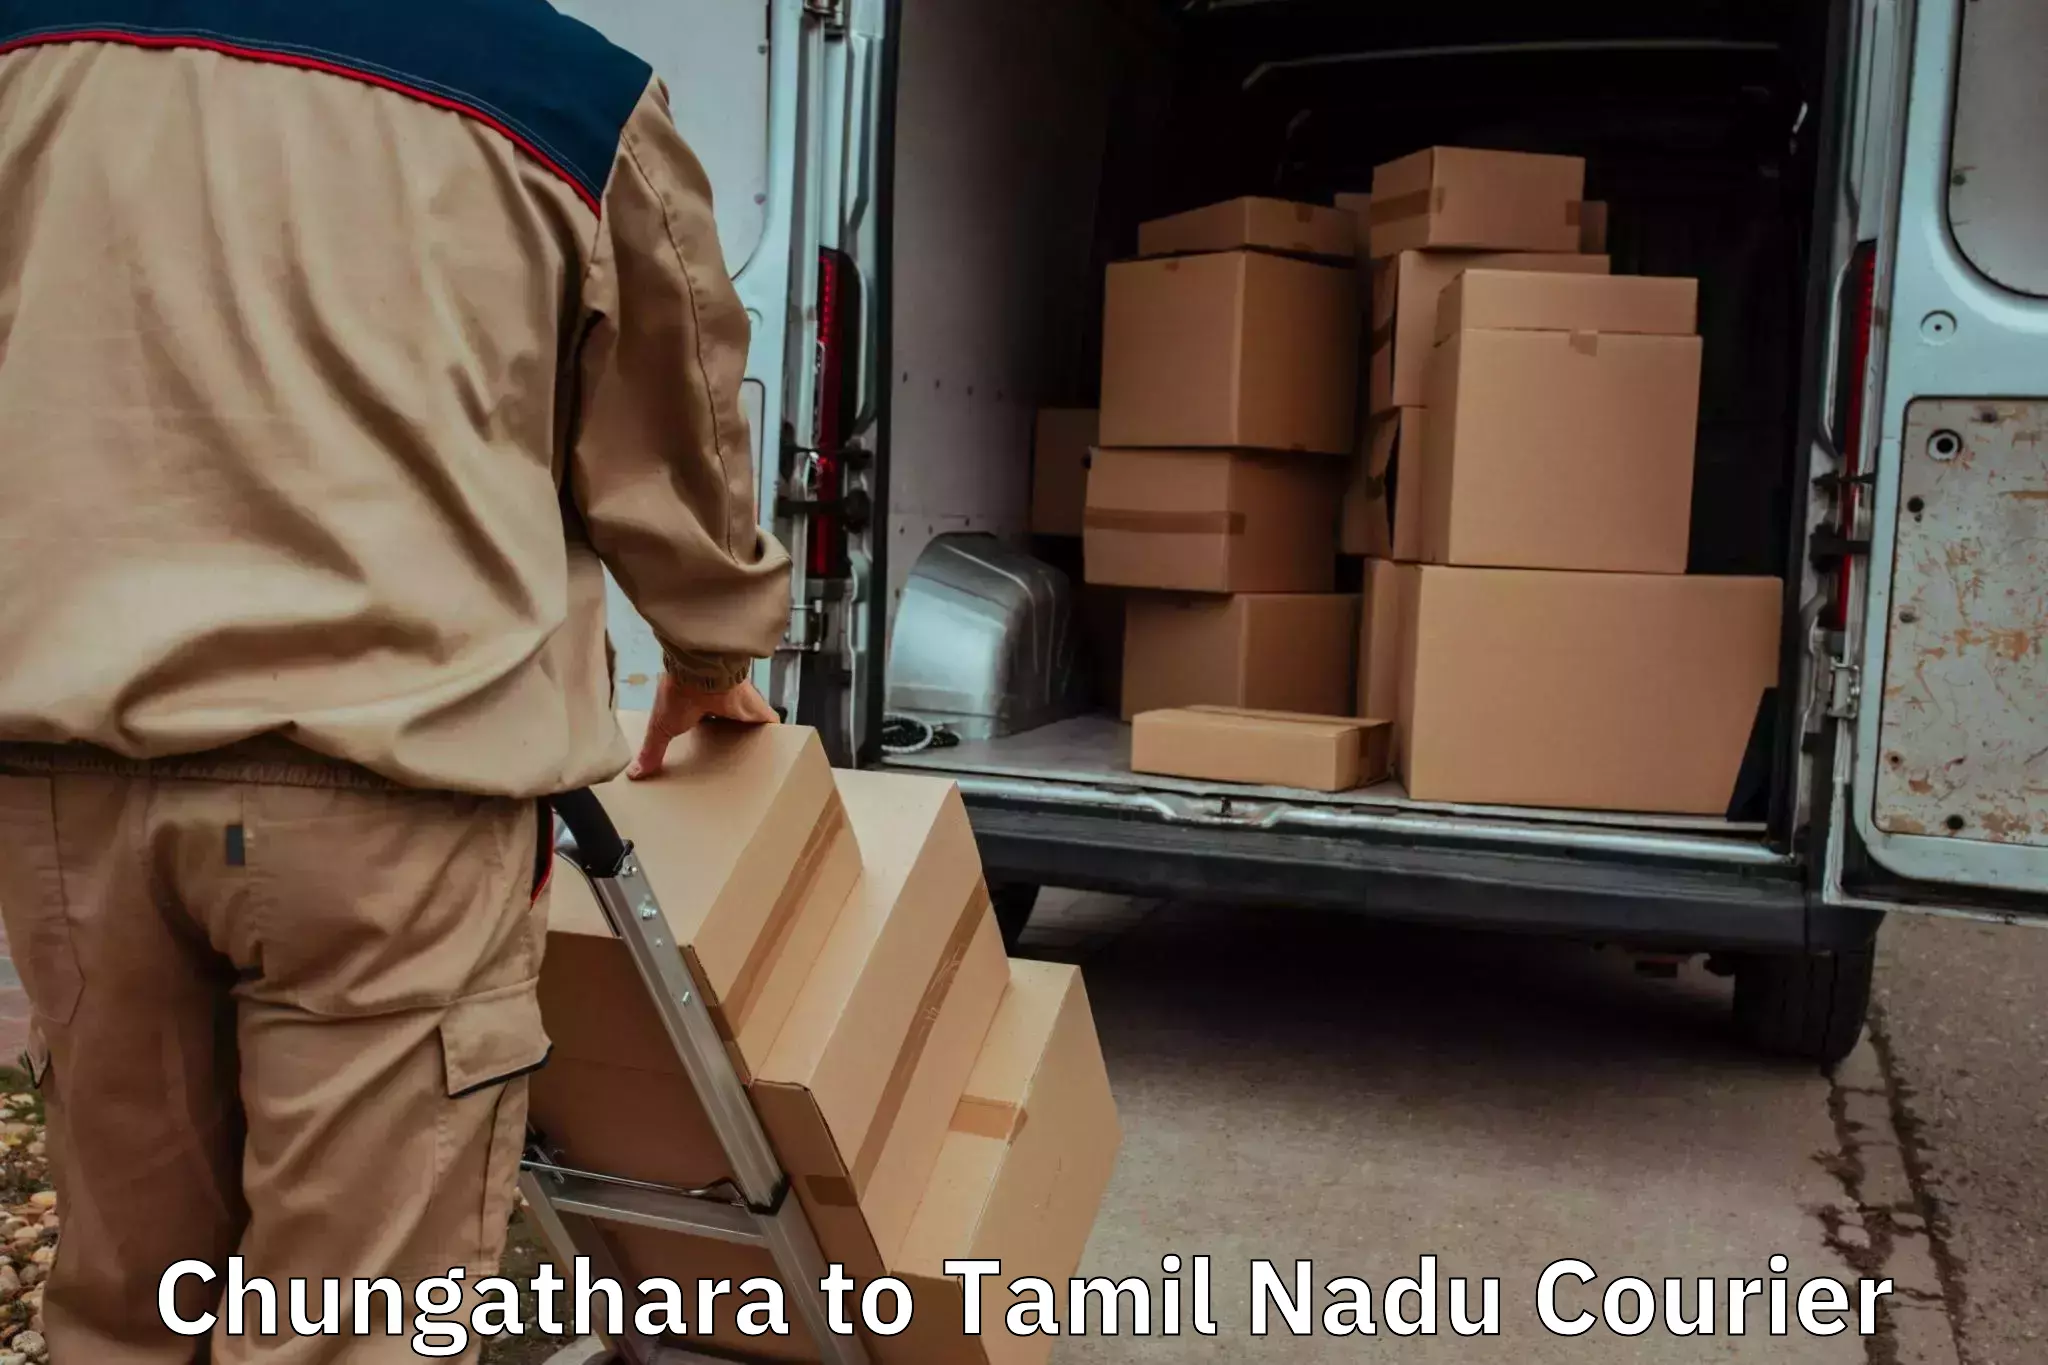 Furniture relocation experts in Chungathara to Karur